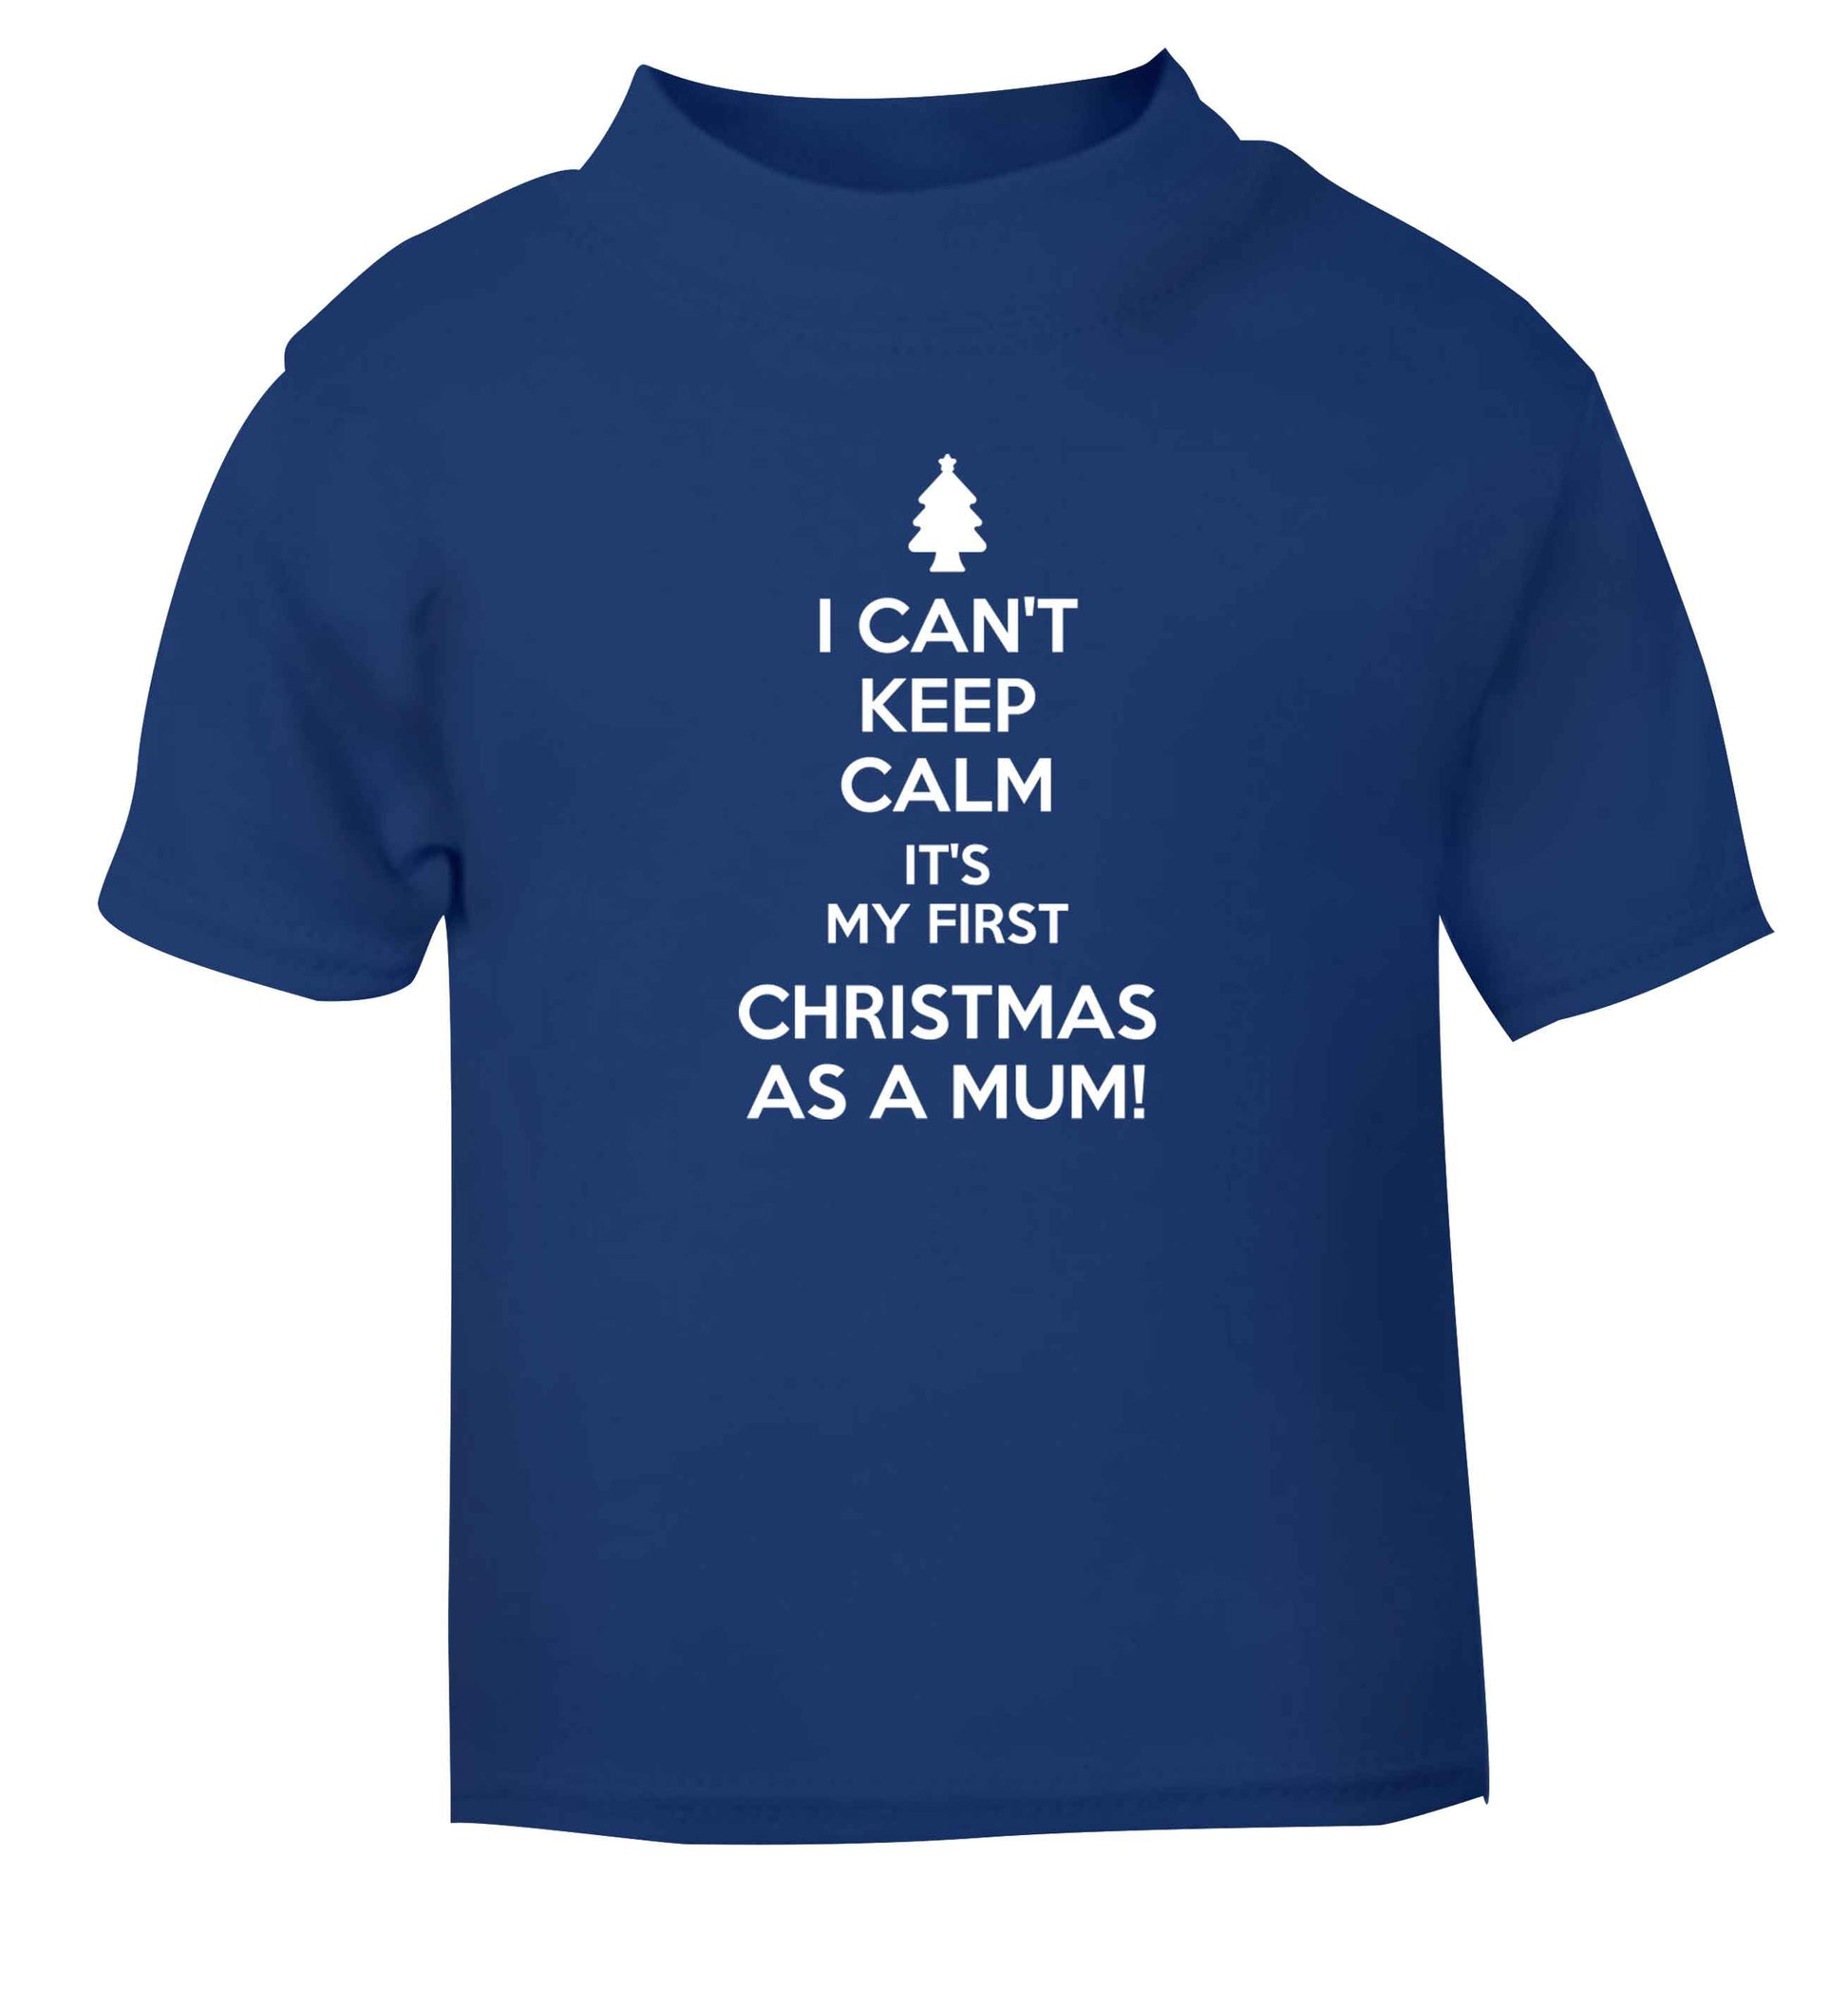 I can't keep calm it's my first Christmas as a mum blue Baby Toddler Tshirt 2 Years